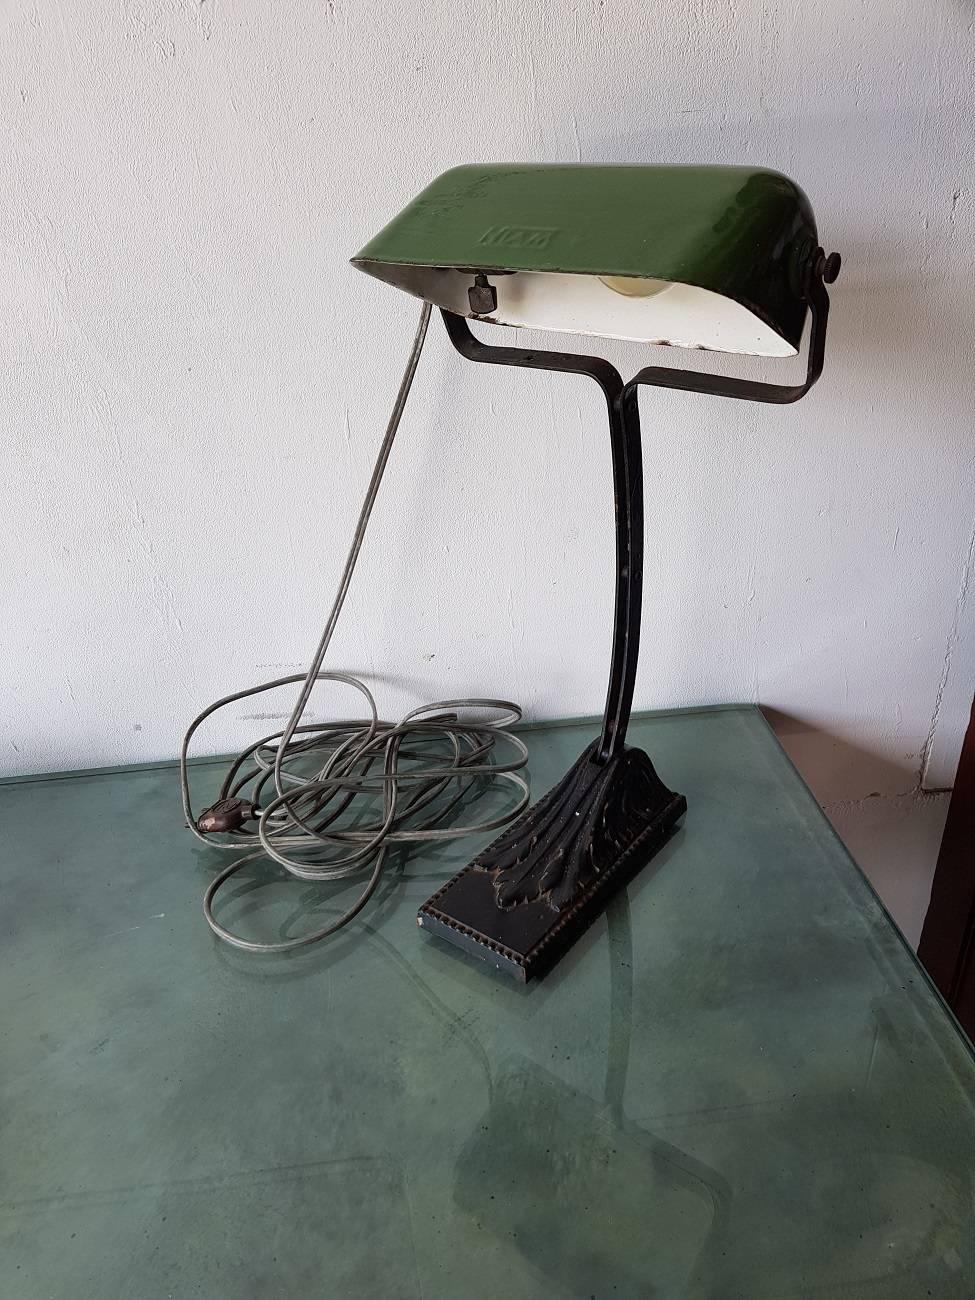 20th Century Old French Notary or Bankers Desk Lamp, circa 1930